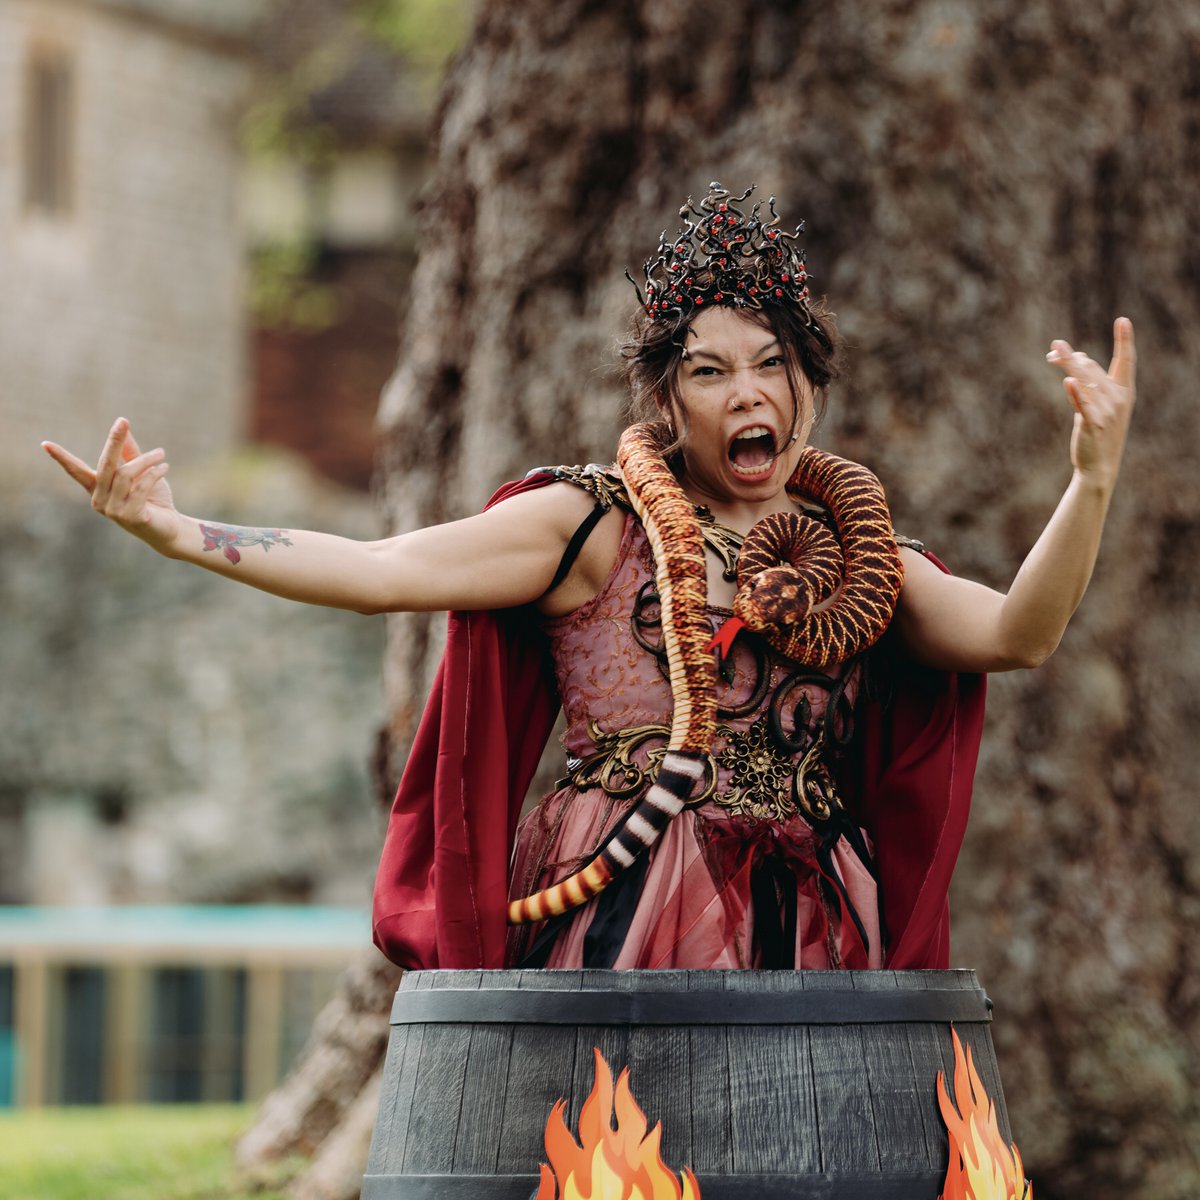 Hell summons Confusion ….

Can Monarchy be Restored? 
The actors are rehearsing a play for the coronation of Charles II …… will all go to plan?
@TowerOfLondon @HRP_palaces 
ow.ly/o32450OCH0i
#restoration #charlesii #halftermfun #letsdolondon #family